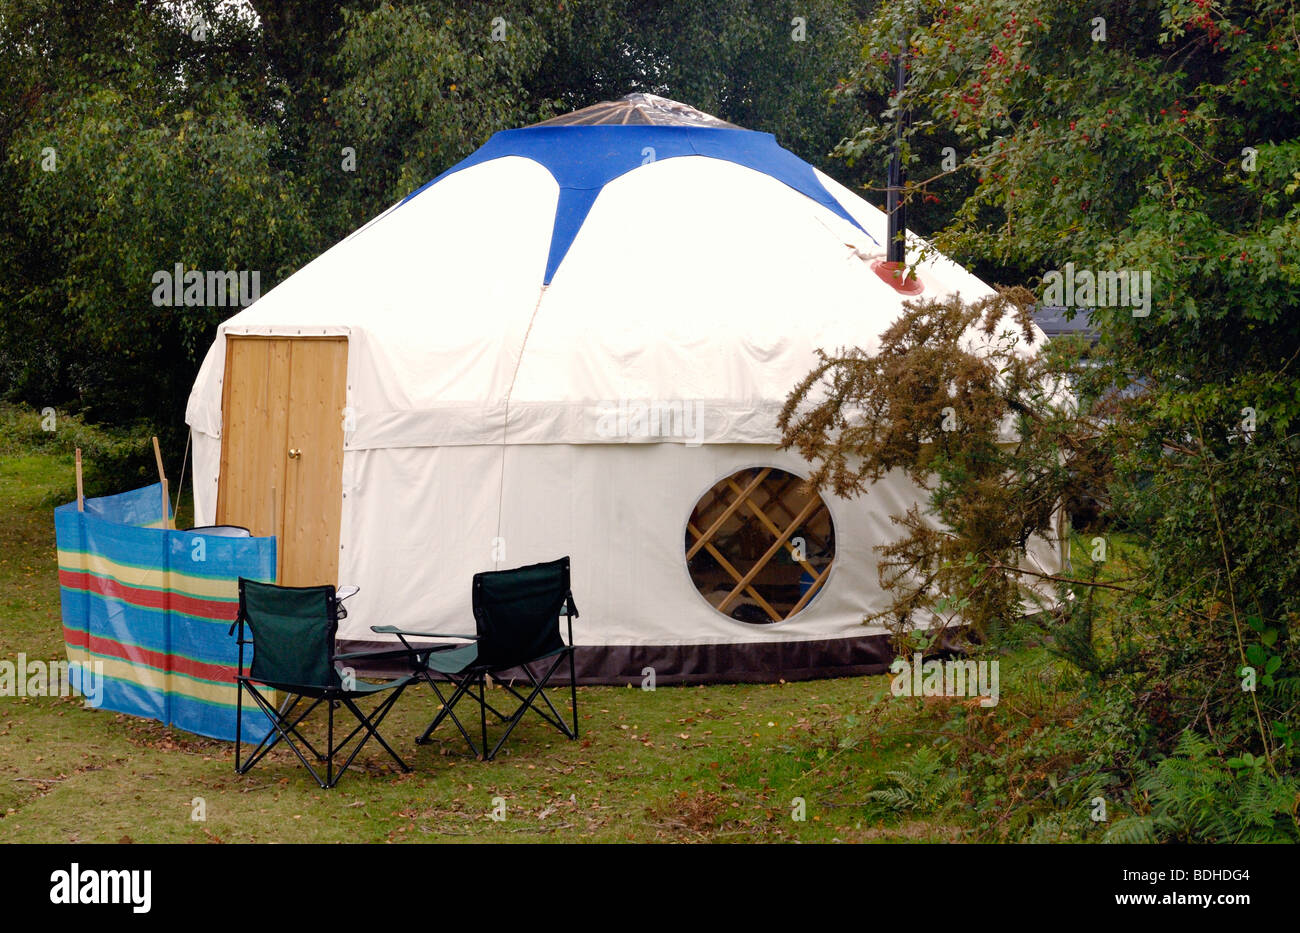 A Yurt tent in a wood Stock Photo